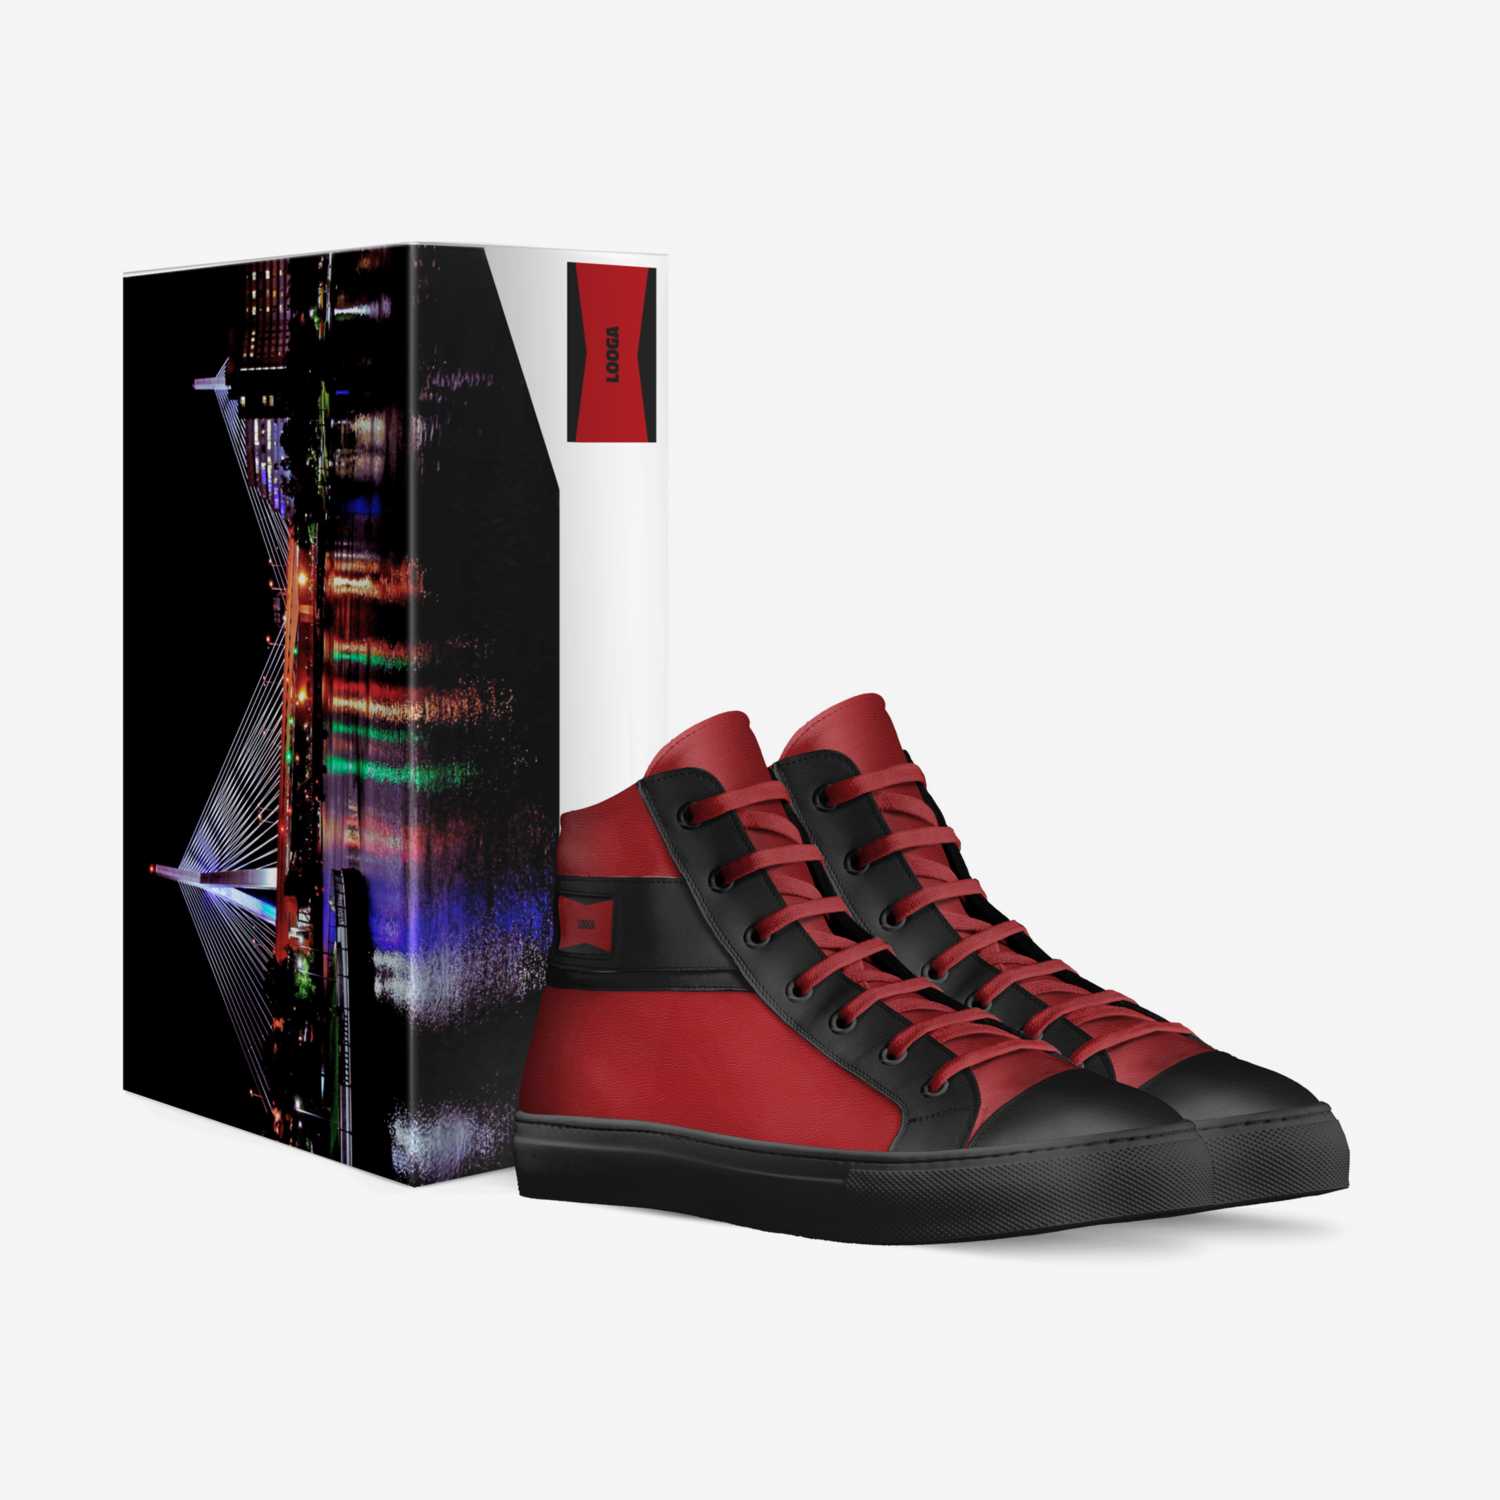 LOOGA custom made in Italy shoes by Hugues Nazaire | Box view